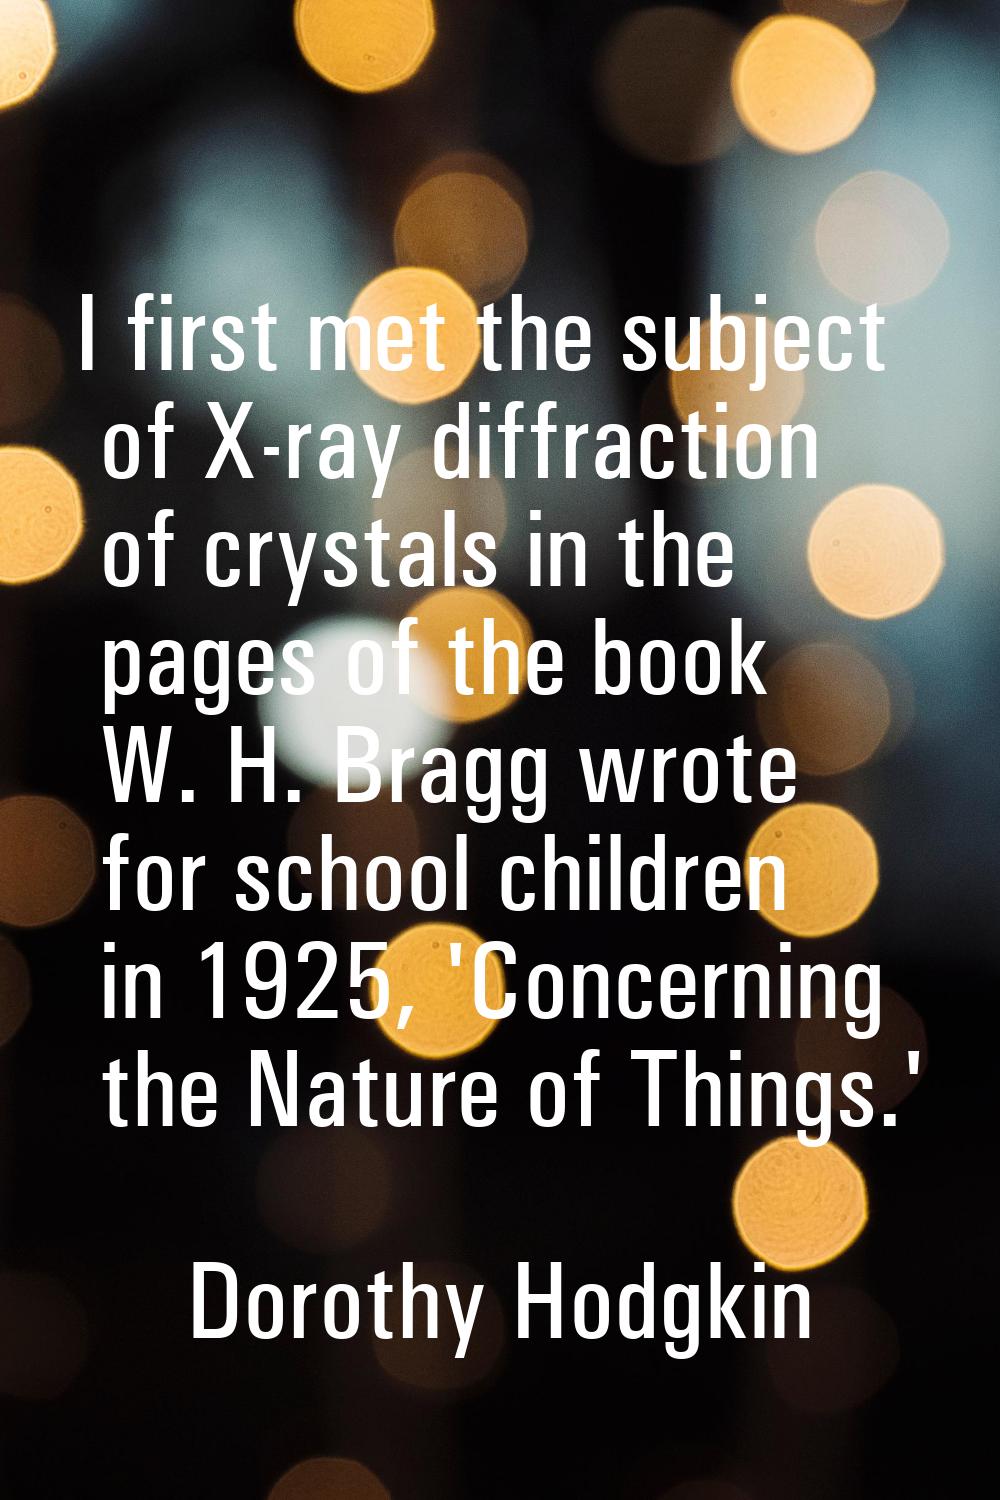 I first met the subject of X-ray diffraction of crystals in the pages of the book W. H. Bragg wrote